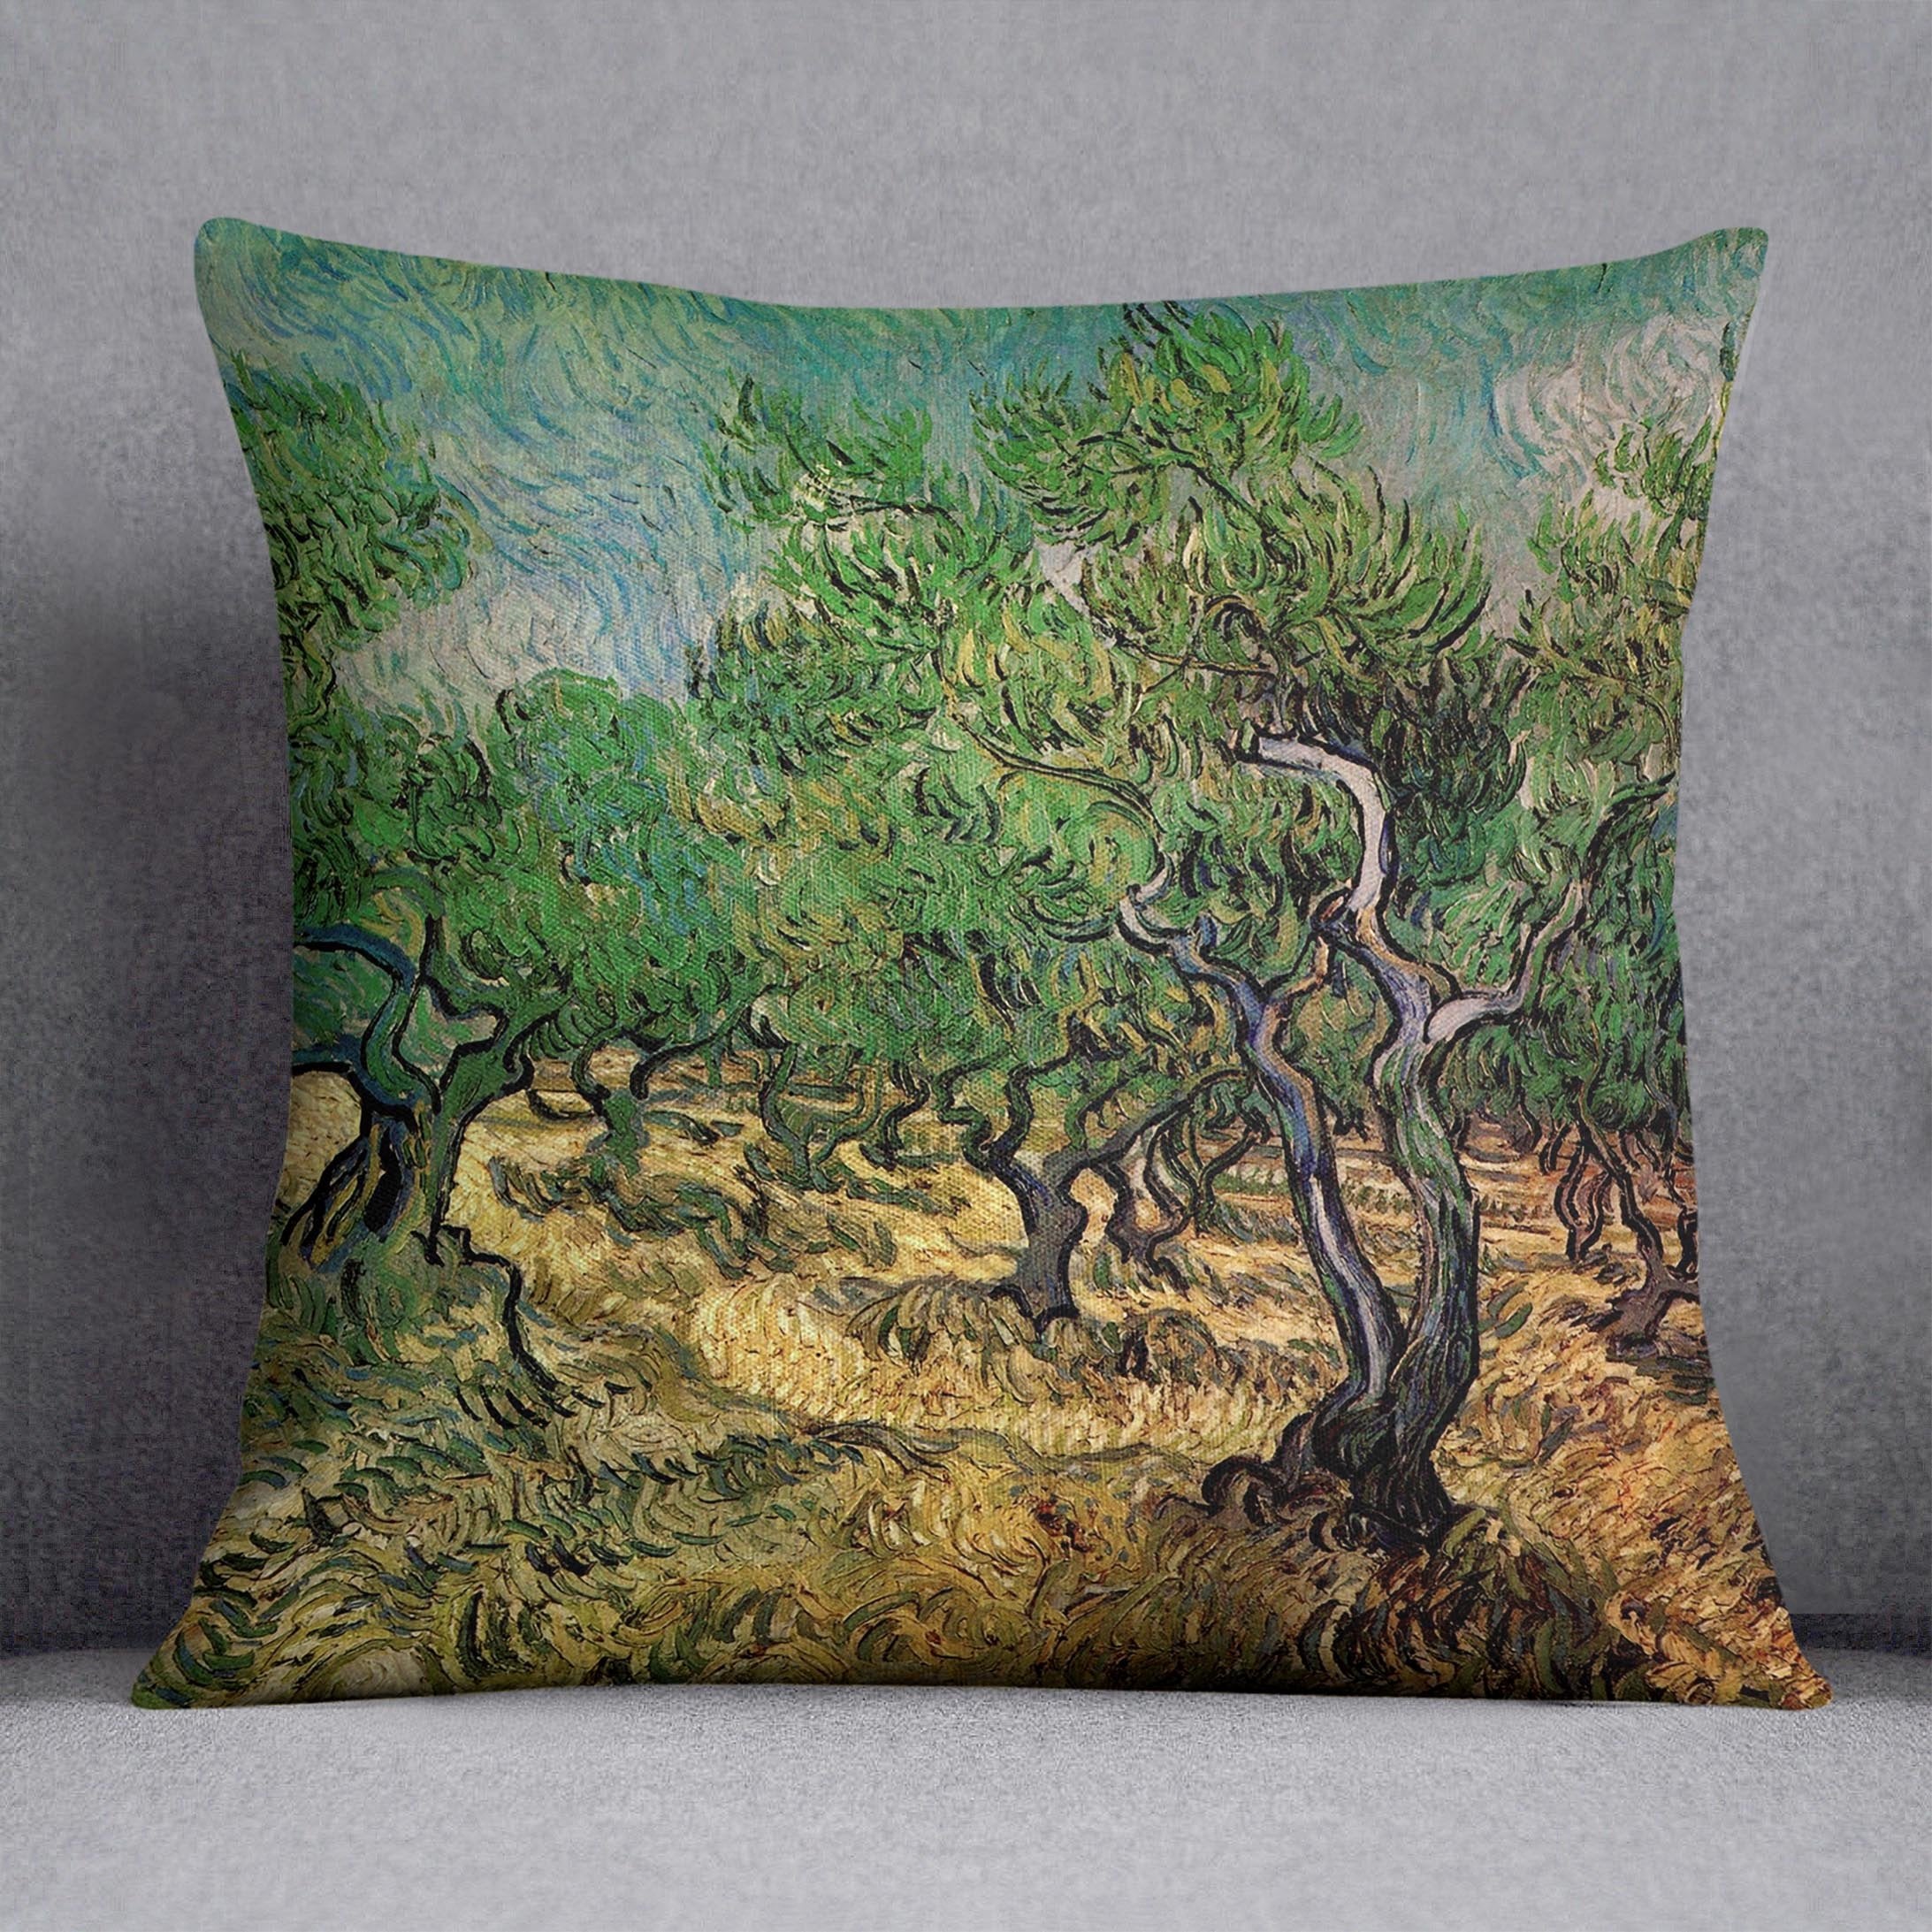 Olive Grove 2 by Van Gogh Throw Pillow